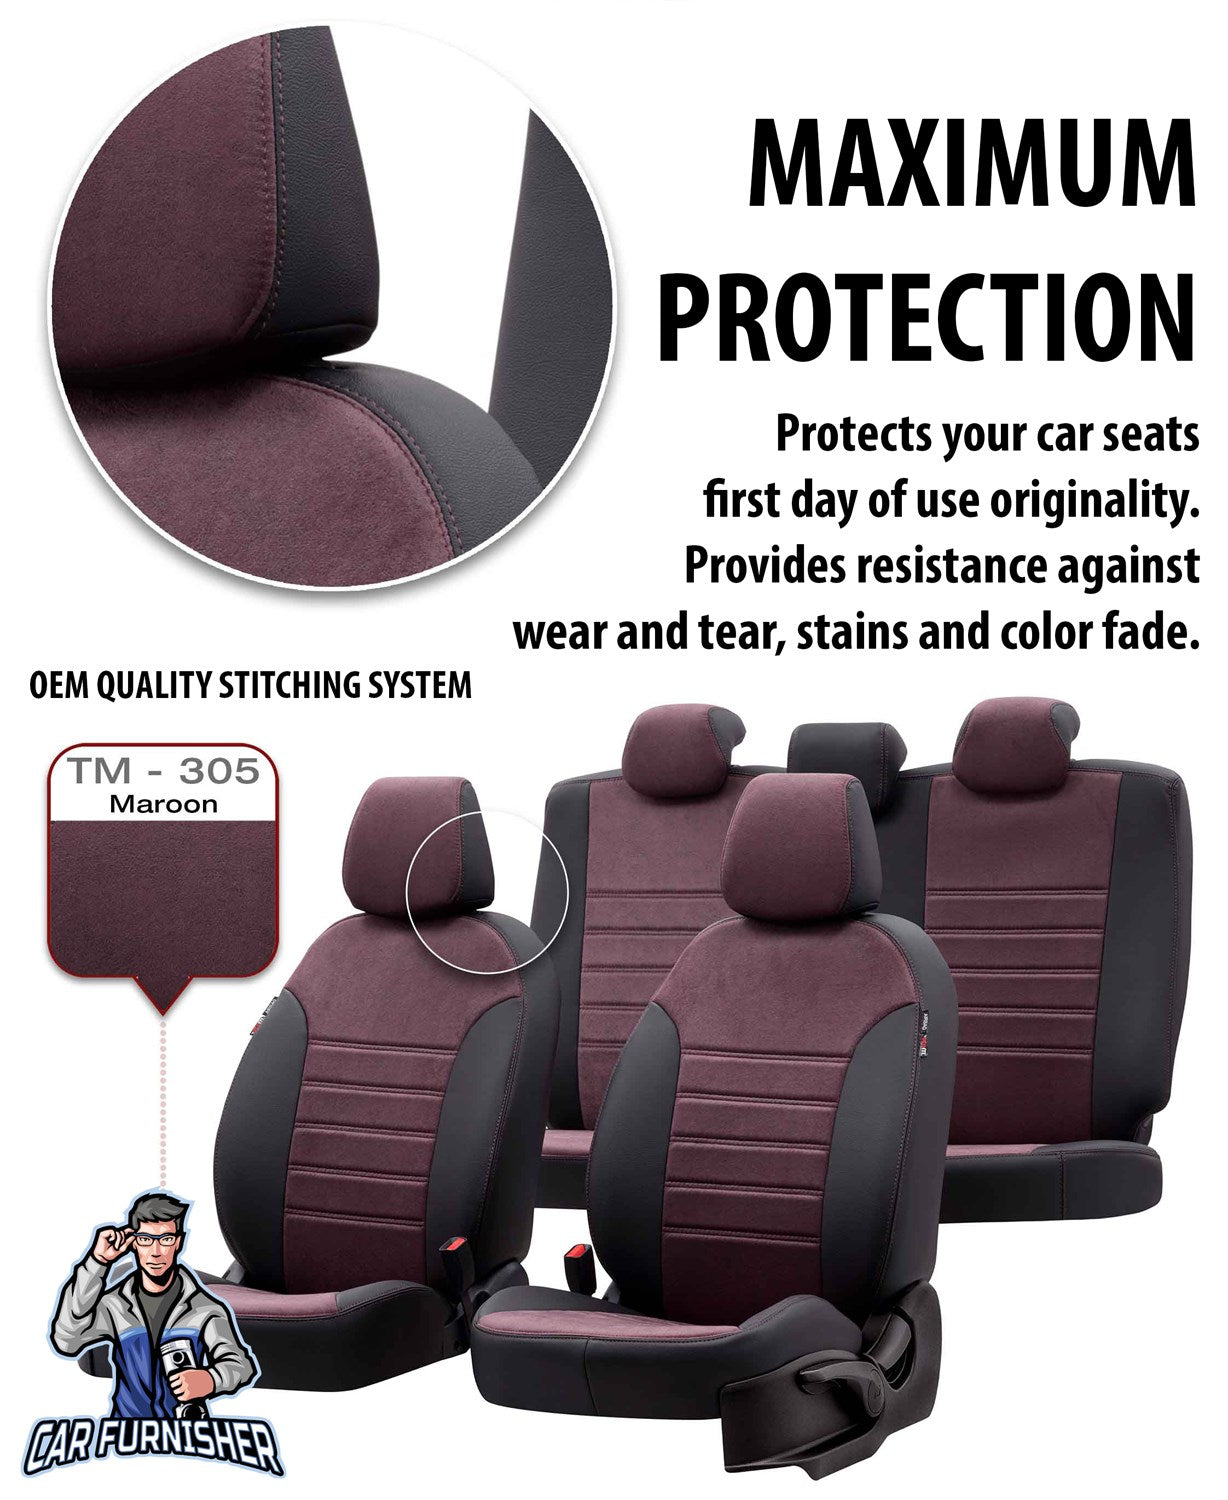 Geely Emgrand Seat Covers Milano Suede Design Burgundy Leather & Suede Fabric